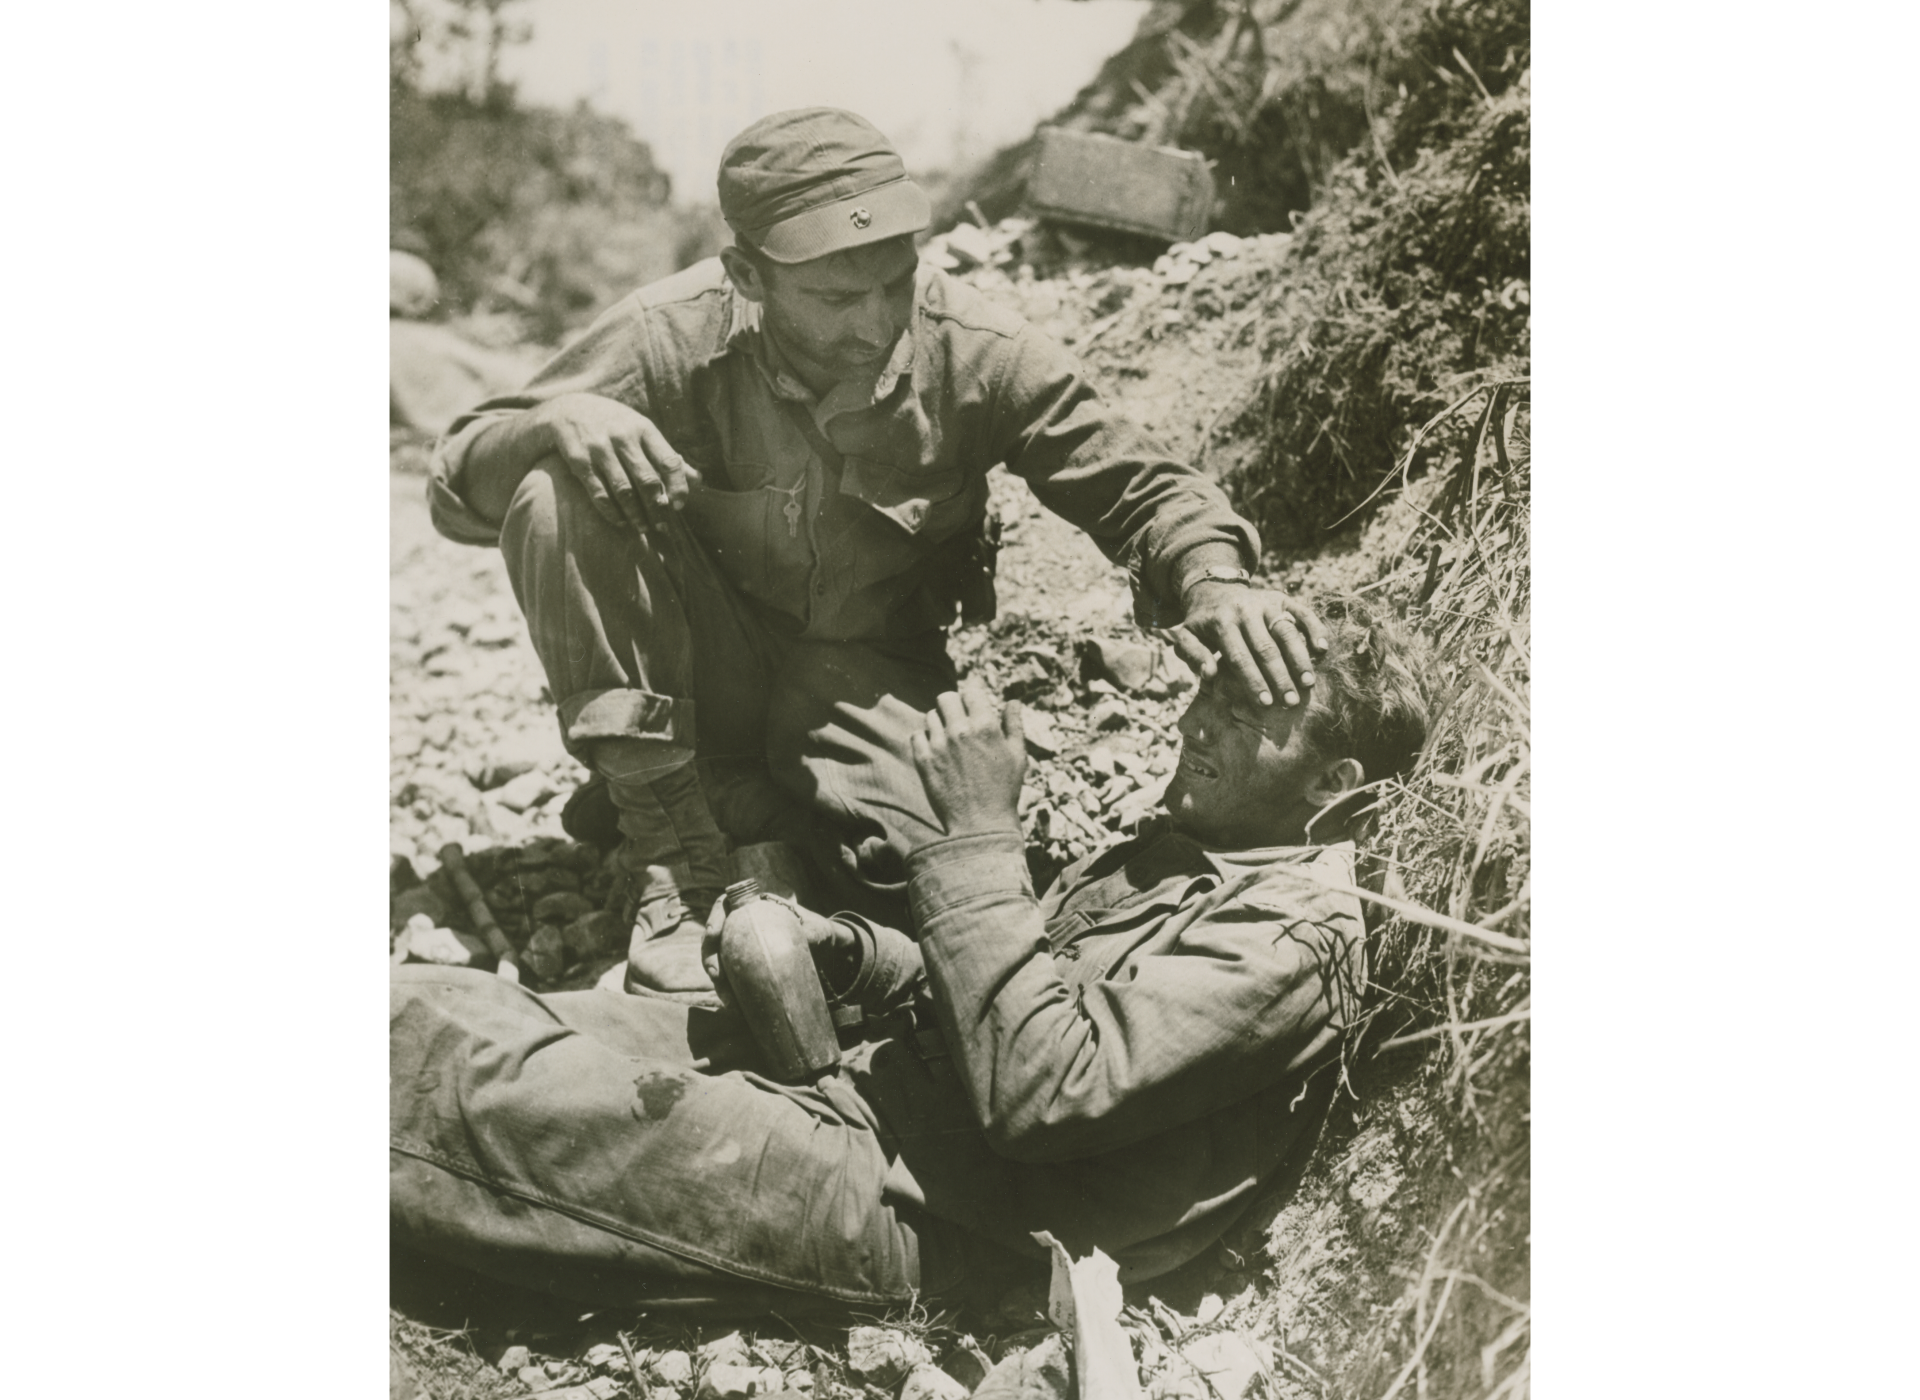 A 1st Division Marine comforts a fellow Marine who had just witnessed the death of his friend. US Navy official photograph. The National WWII Museum, Gift of Charles Ives, Accession #2011.102.602